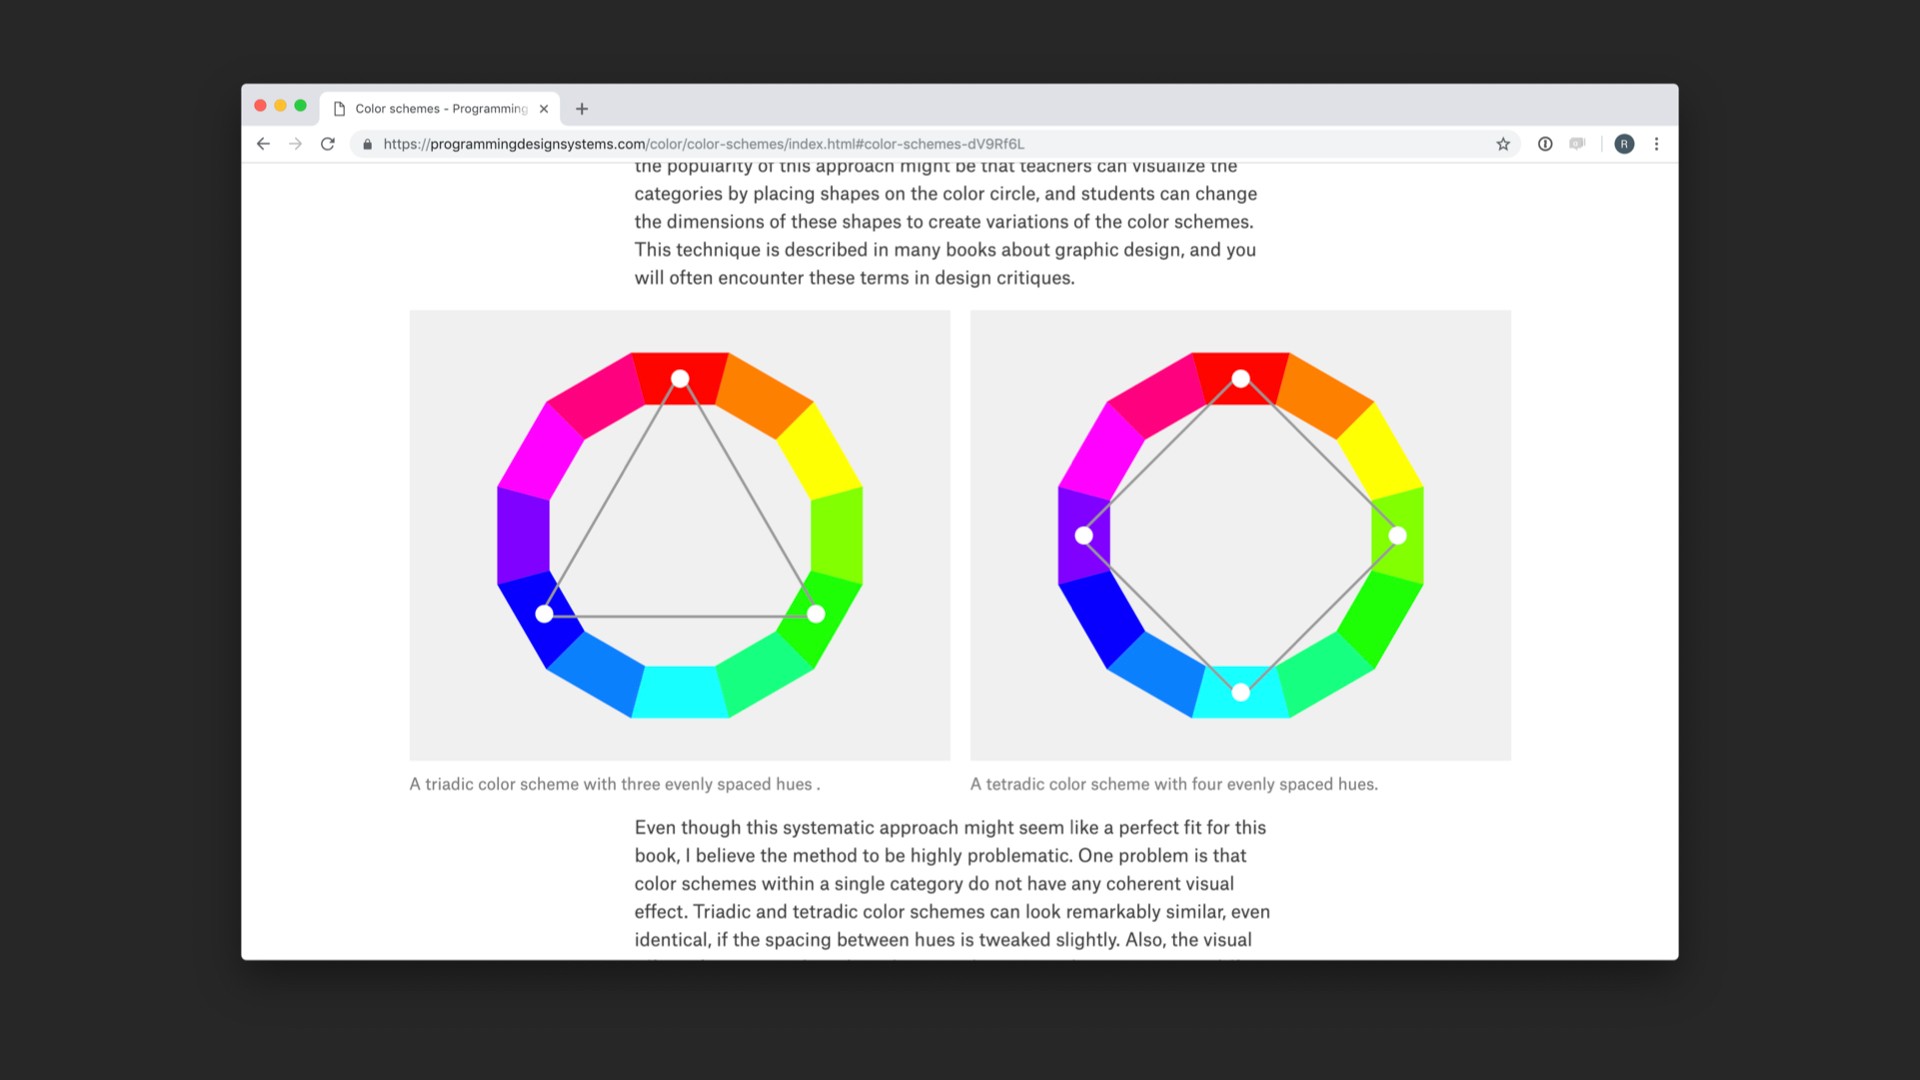 Screenshot of color diagrams in referenced website.